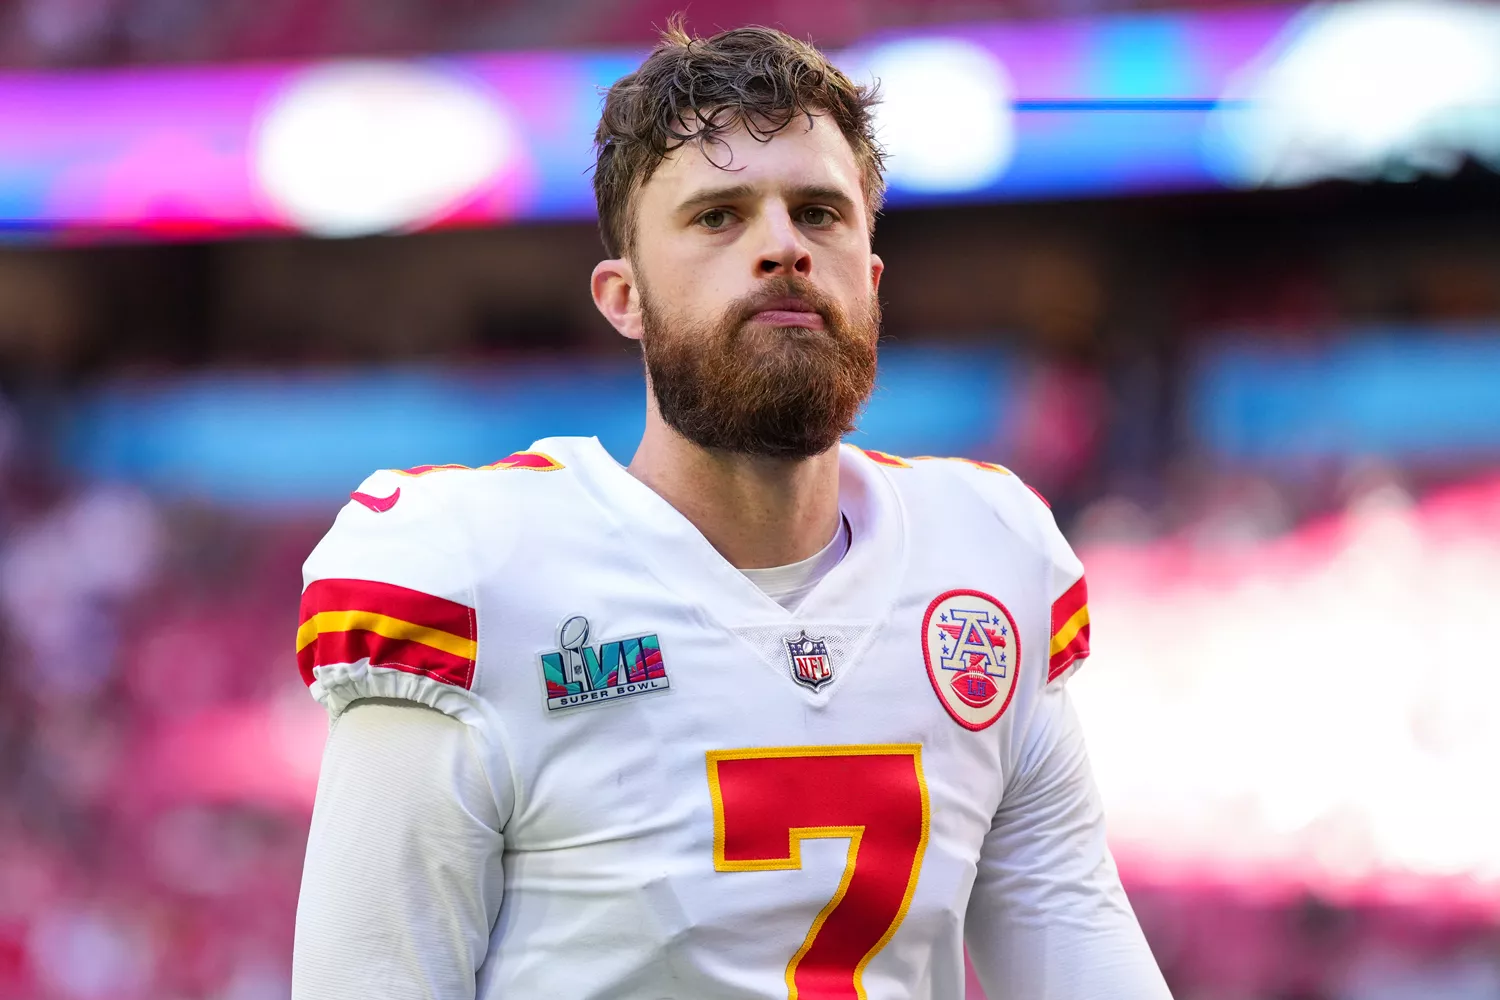 Harrison Butker's NFL Jersey SKYROCKET Sells After Epic Opening Speech, Outsells Travis Kelce and Patrick Mahomes |  The Gateway expert